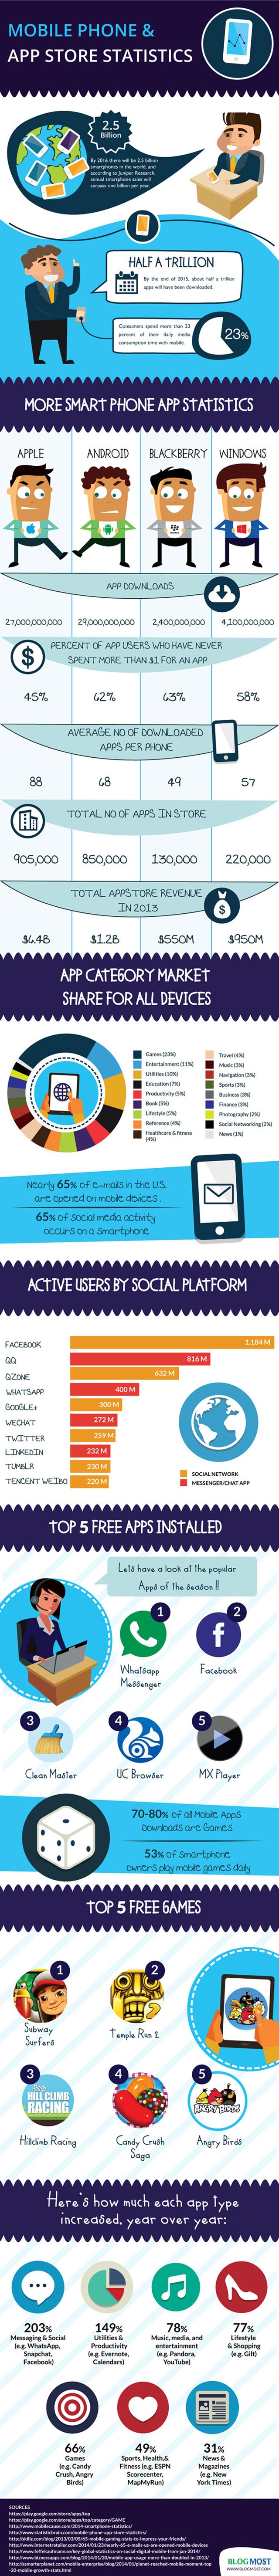 Mobile_Apps_Infographic